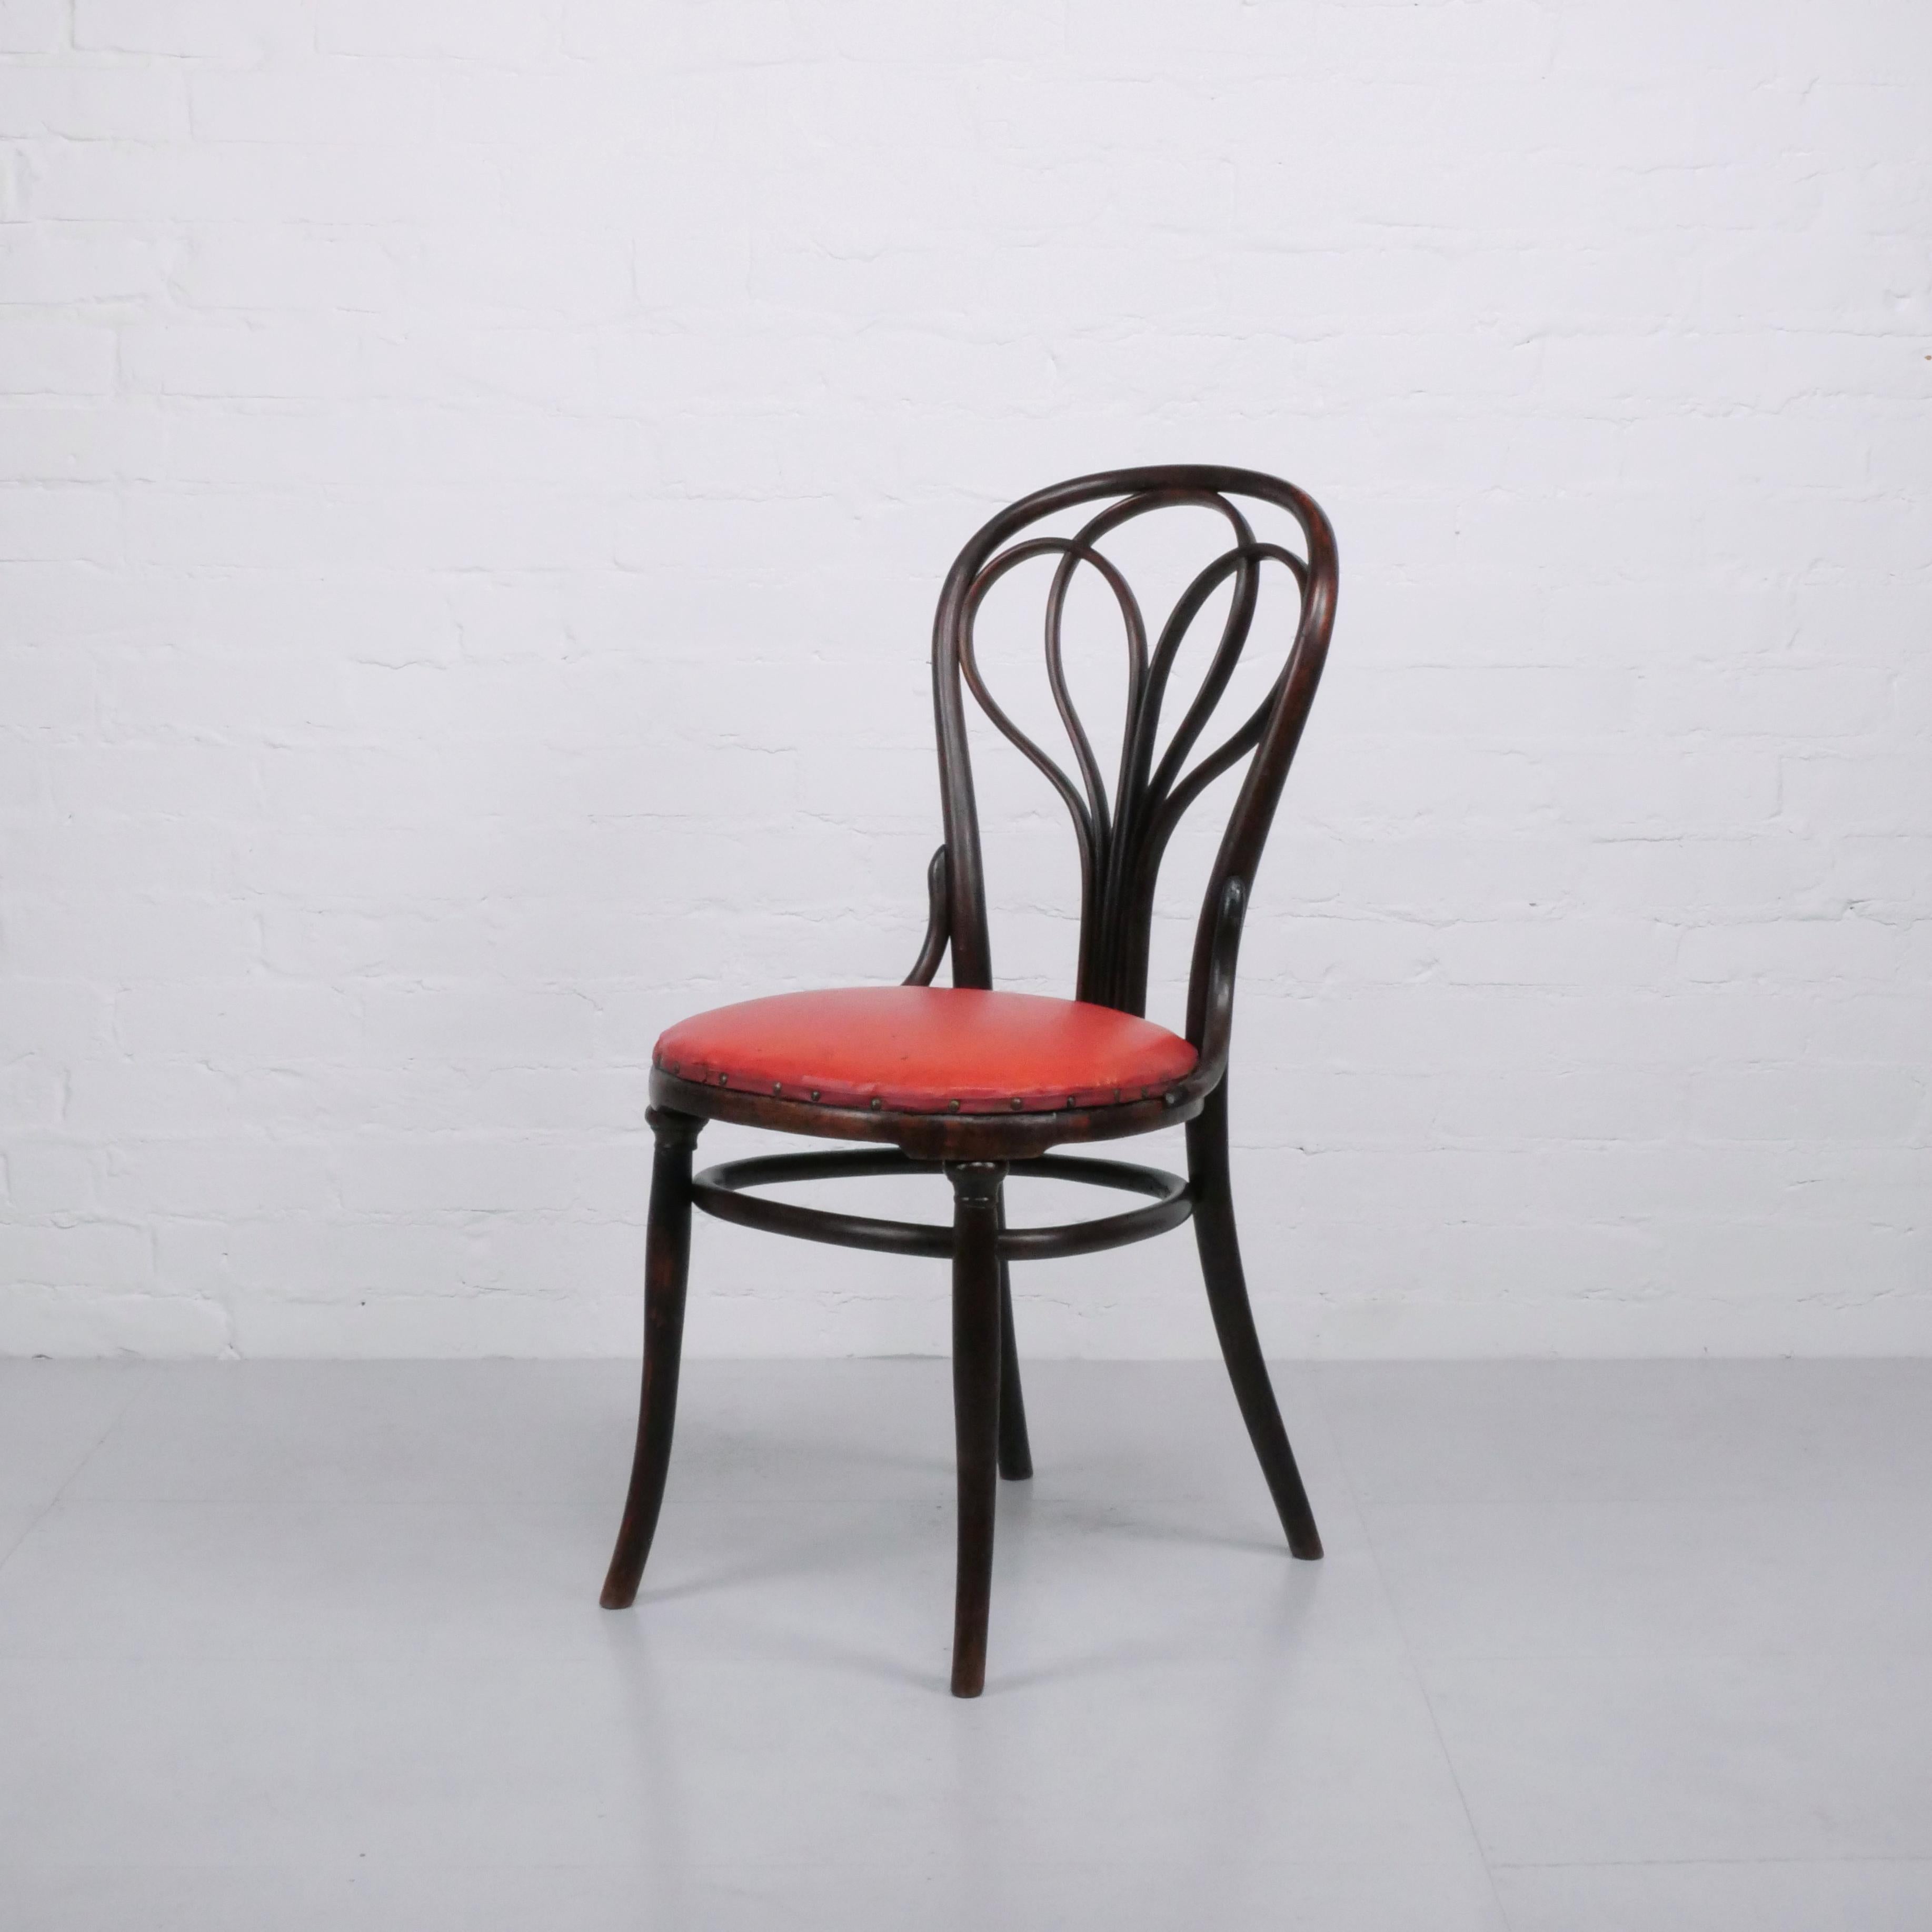 Set of 4 no.25 dining chairs by Gebrüder Thonet, c. 1870 In Good Condition For Sale In London, GB